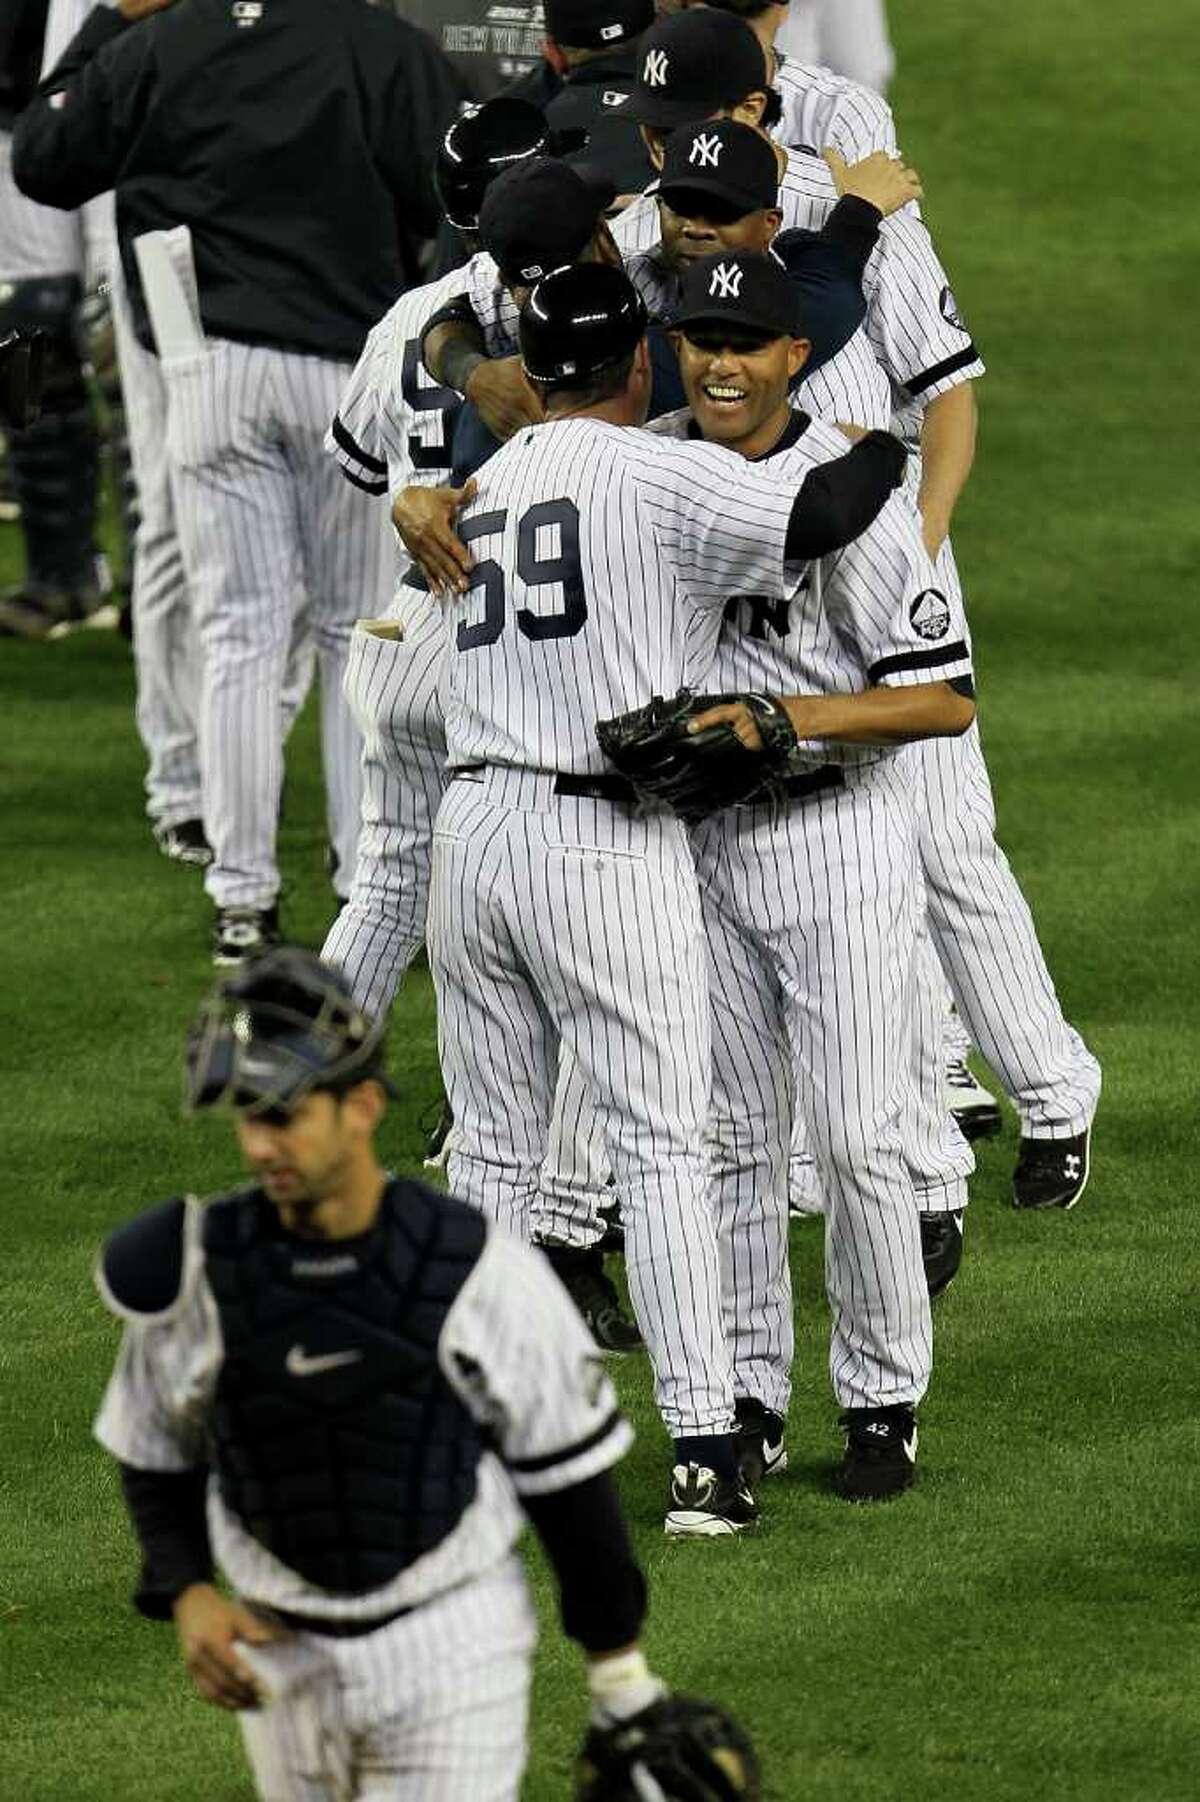 NEW YORK - OCTOBER 09: Mariano Rivera #42 of the New York Yankees celebrates with his teammates after their 6-1 win against the Minnesota Twins during Game Three of the ALDS part of the 2010 MLB Playoffs at Yankee Stadium on October 9, 2010 in the Bronx borough of New York City. (Photo by Chris McGrath/Getty Images) *** Local Caption *** Mariano Rivera